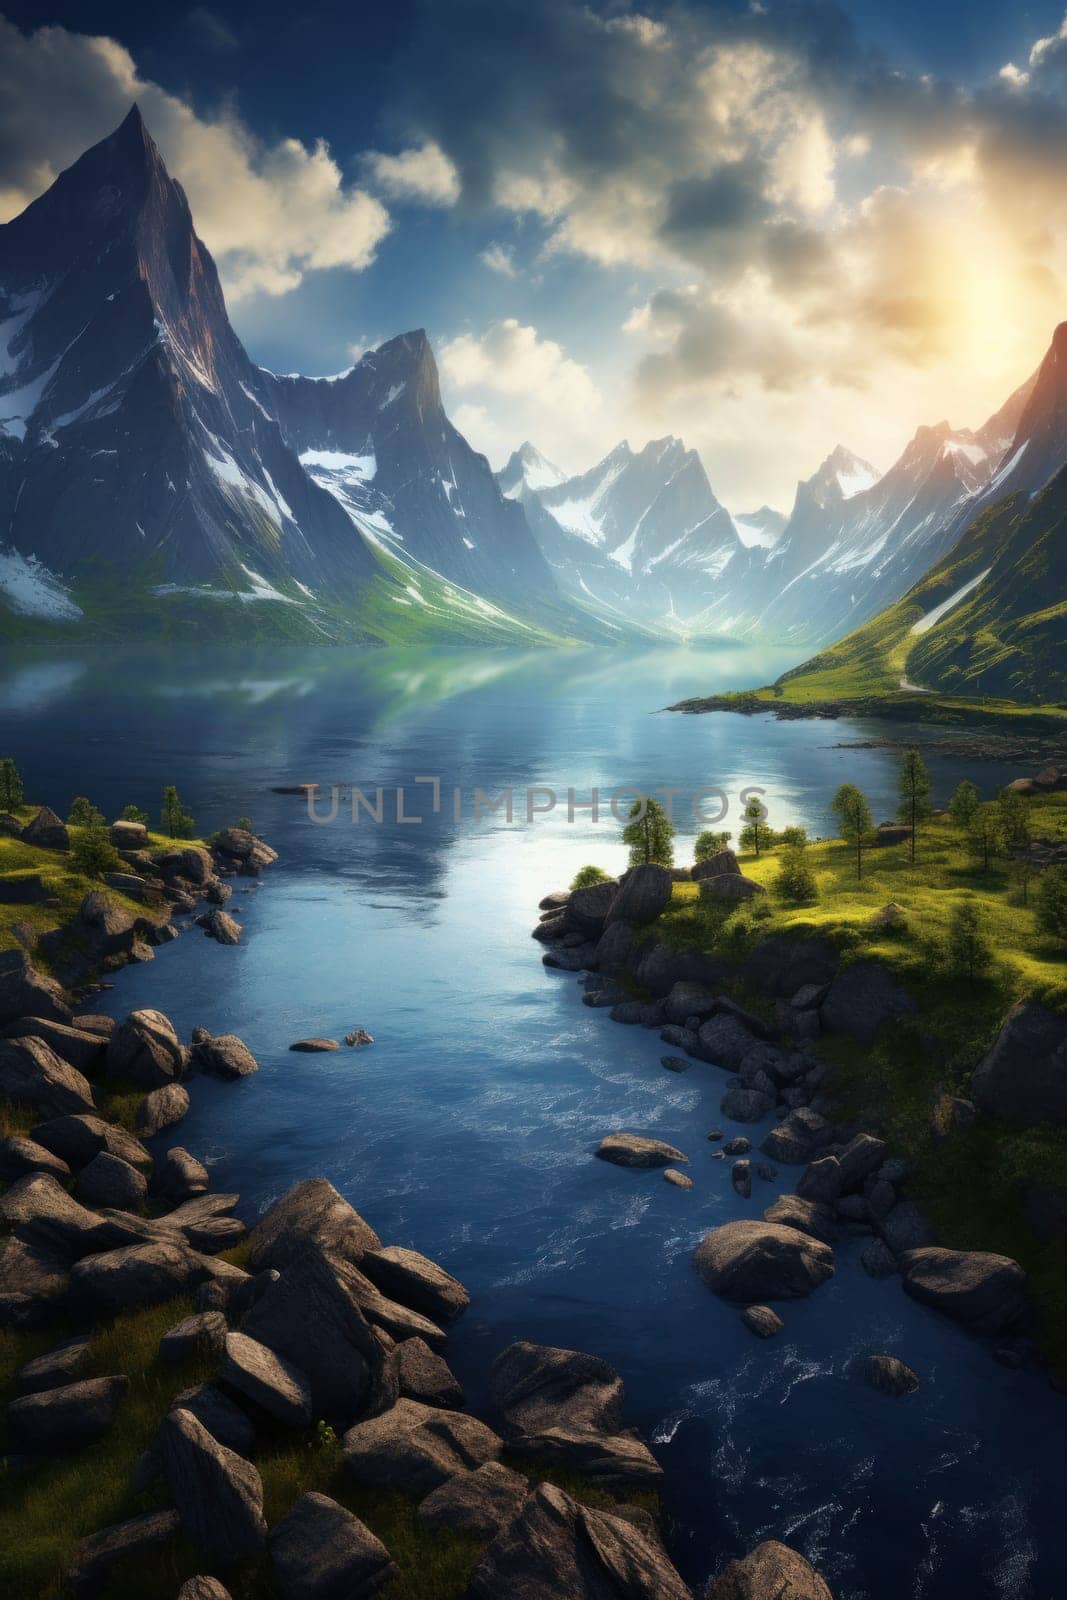 A beautiful mountain landscape with a river and rocks